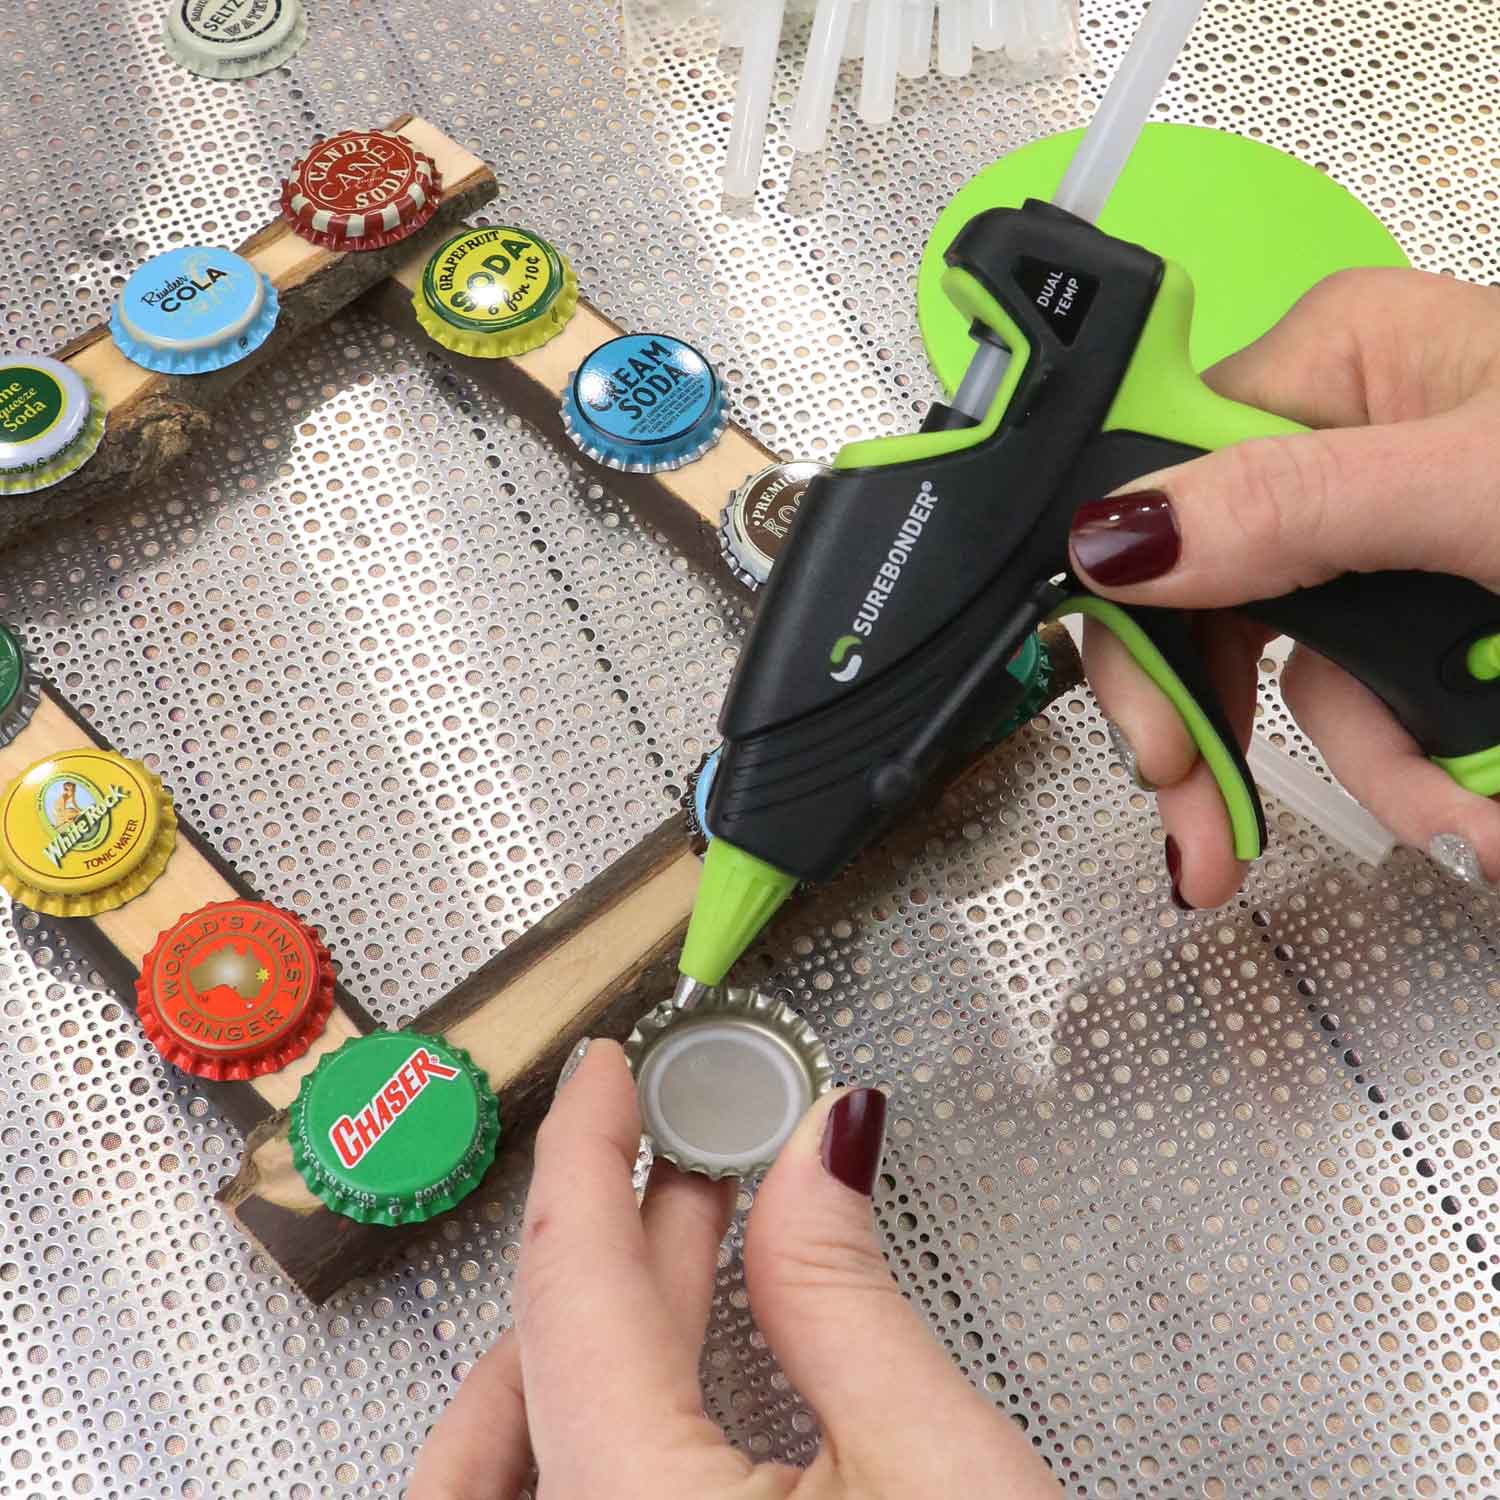 Surebonder Mini Hot Glue Gun With Dual Temperature Includes 12 Glue Sticks  20W 120V Bond a Variety of Materials Including Delicate Fabrics and Strong  Woods & Metals (Plus Series DT-200FKIT)